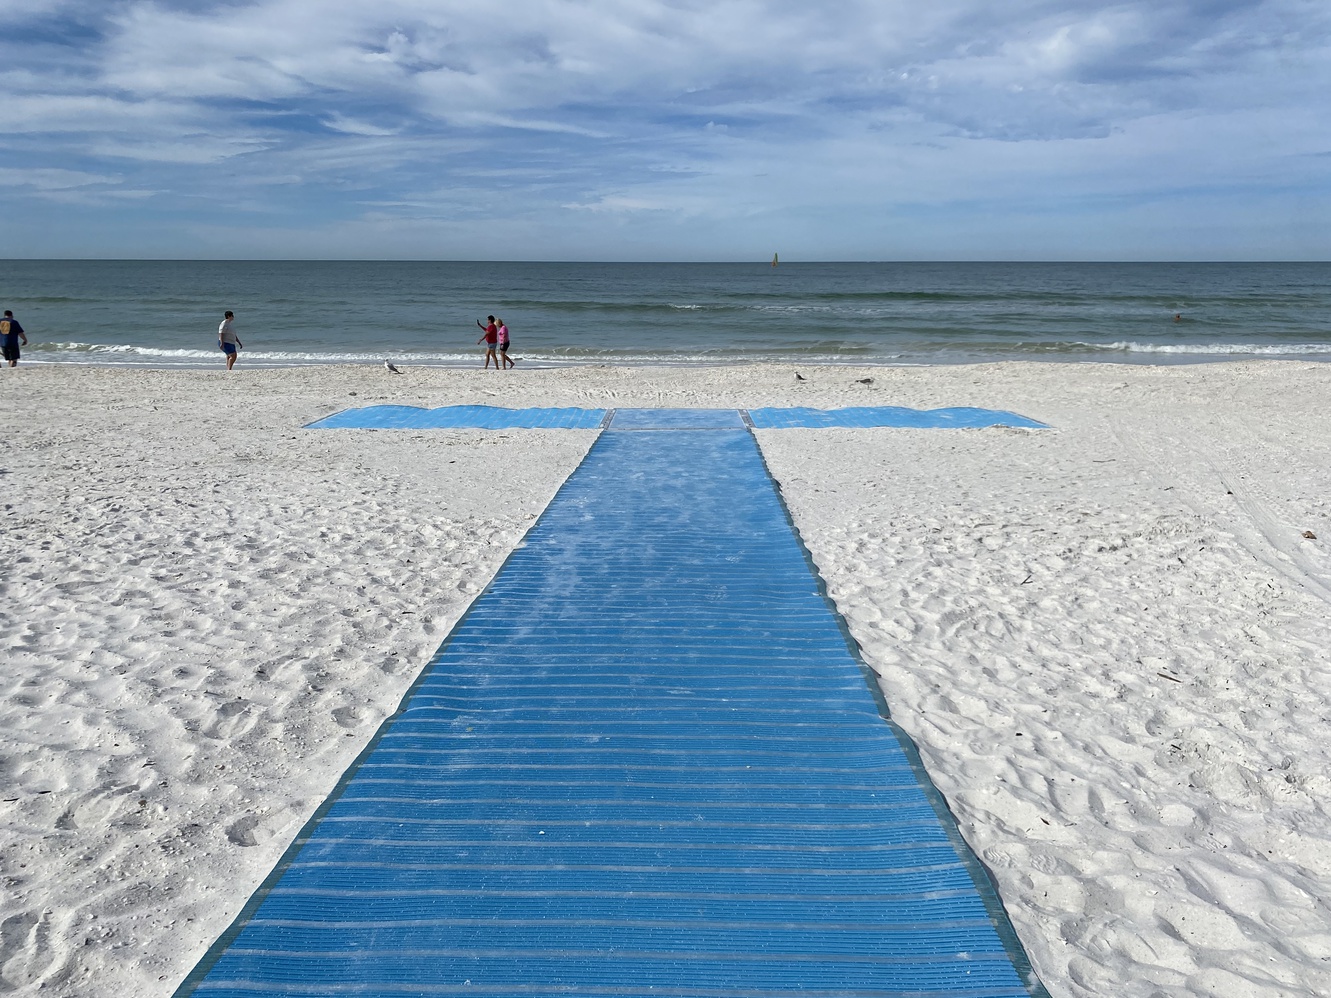 The beautiful blue boardwalk will deliver beachgoers straight
      to the ocean.